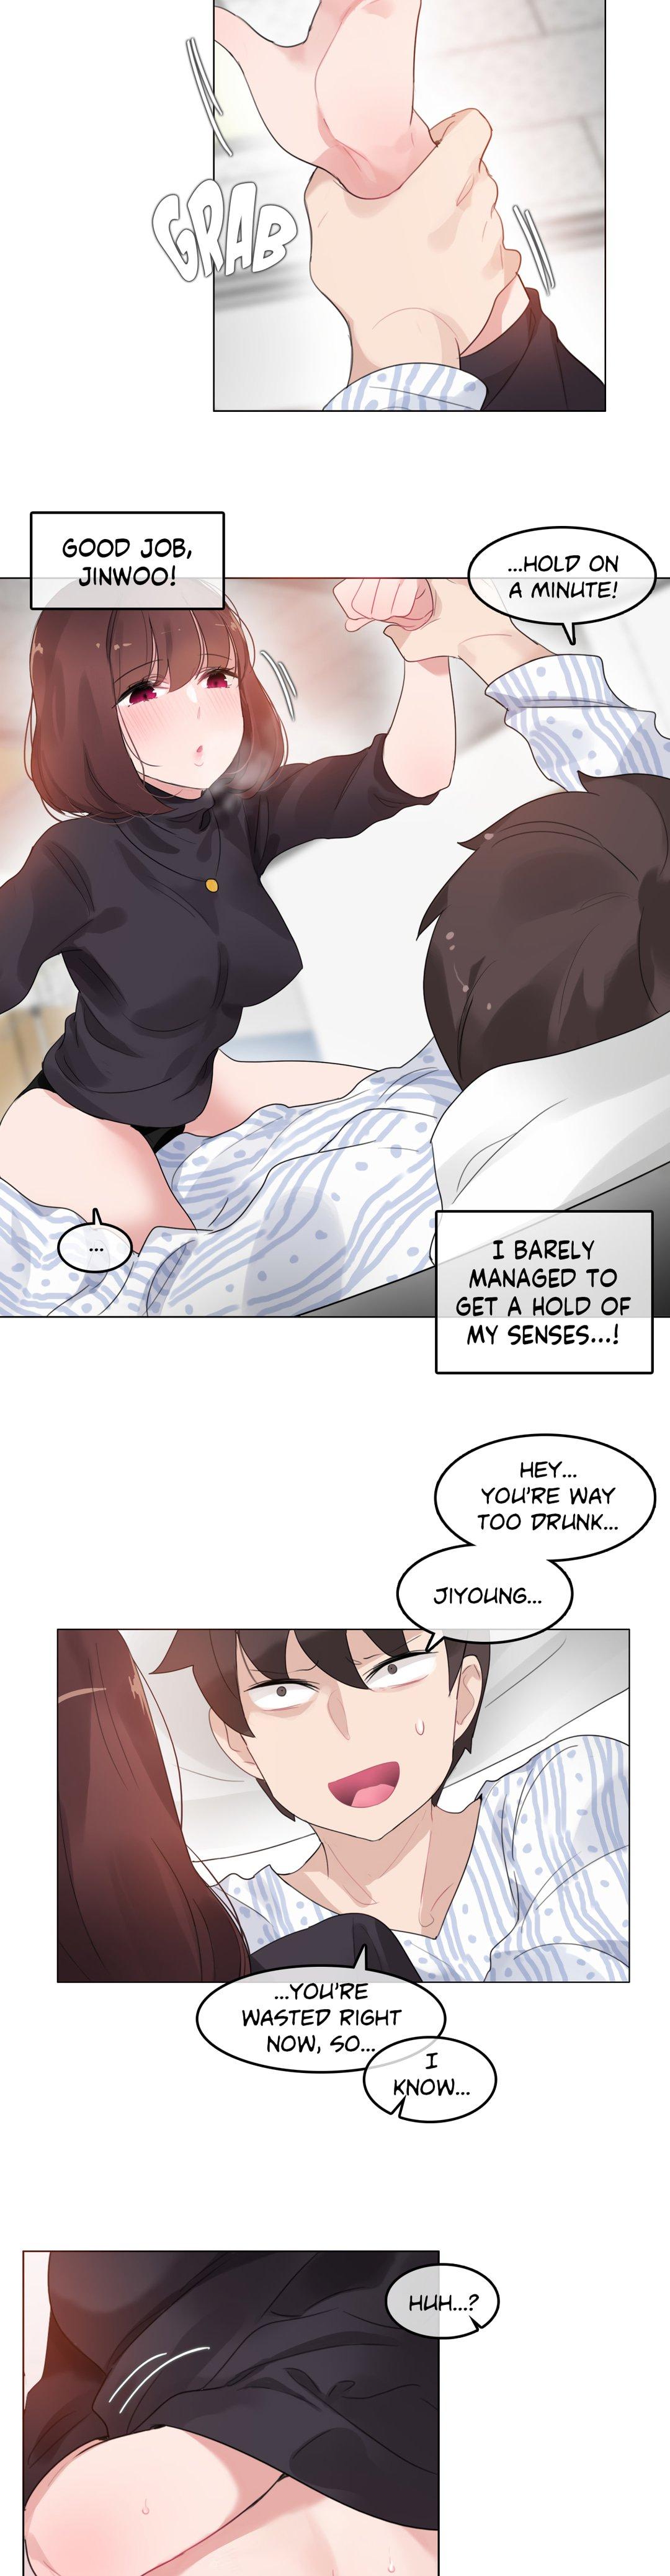 A Pervert's Daily Life • Chapter 46-50 89